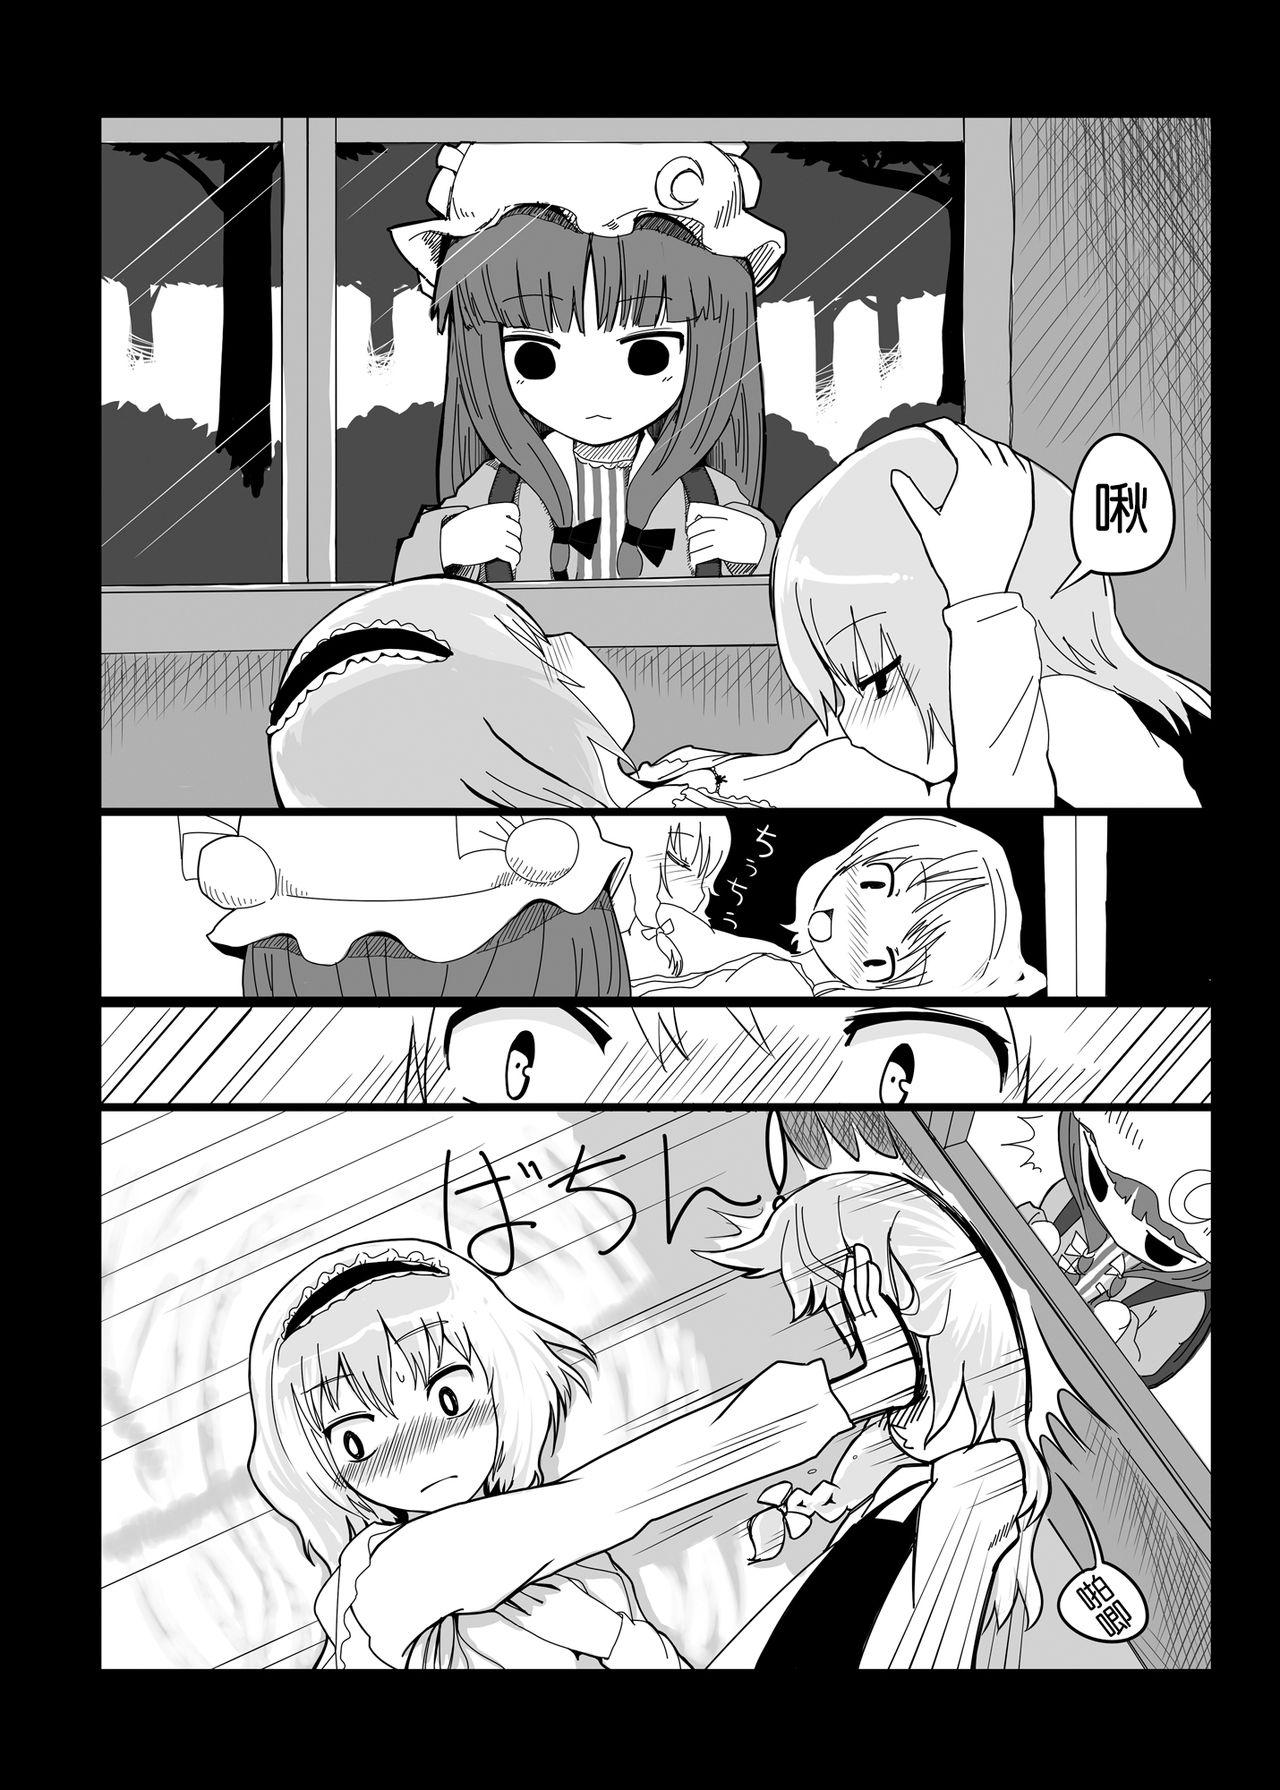 Athletic Touhou Ero Atsume. - Touhou project Cams - Page 8